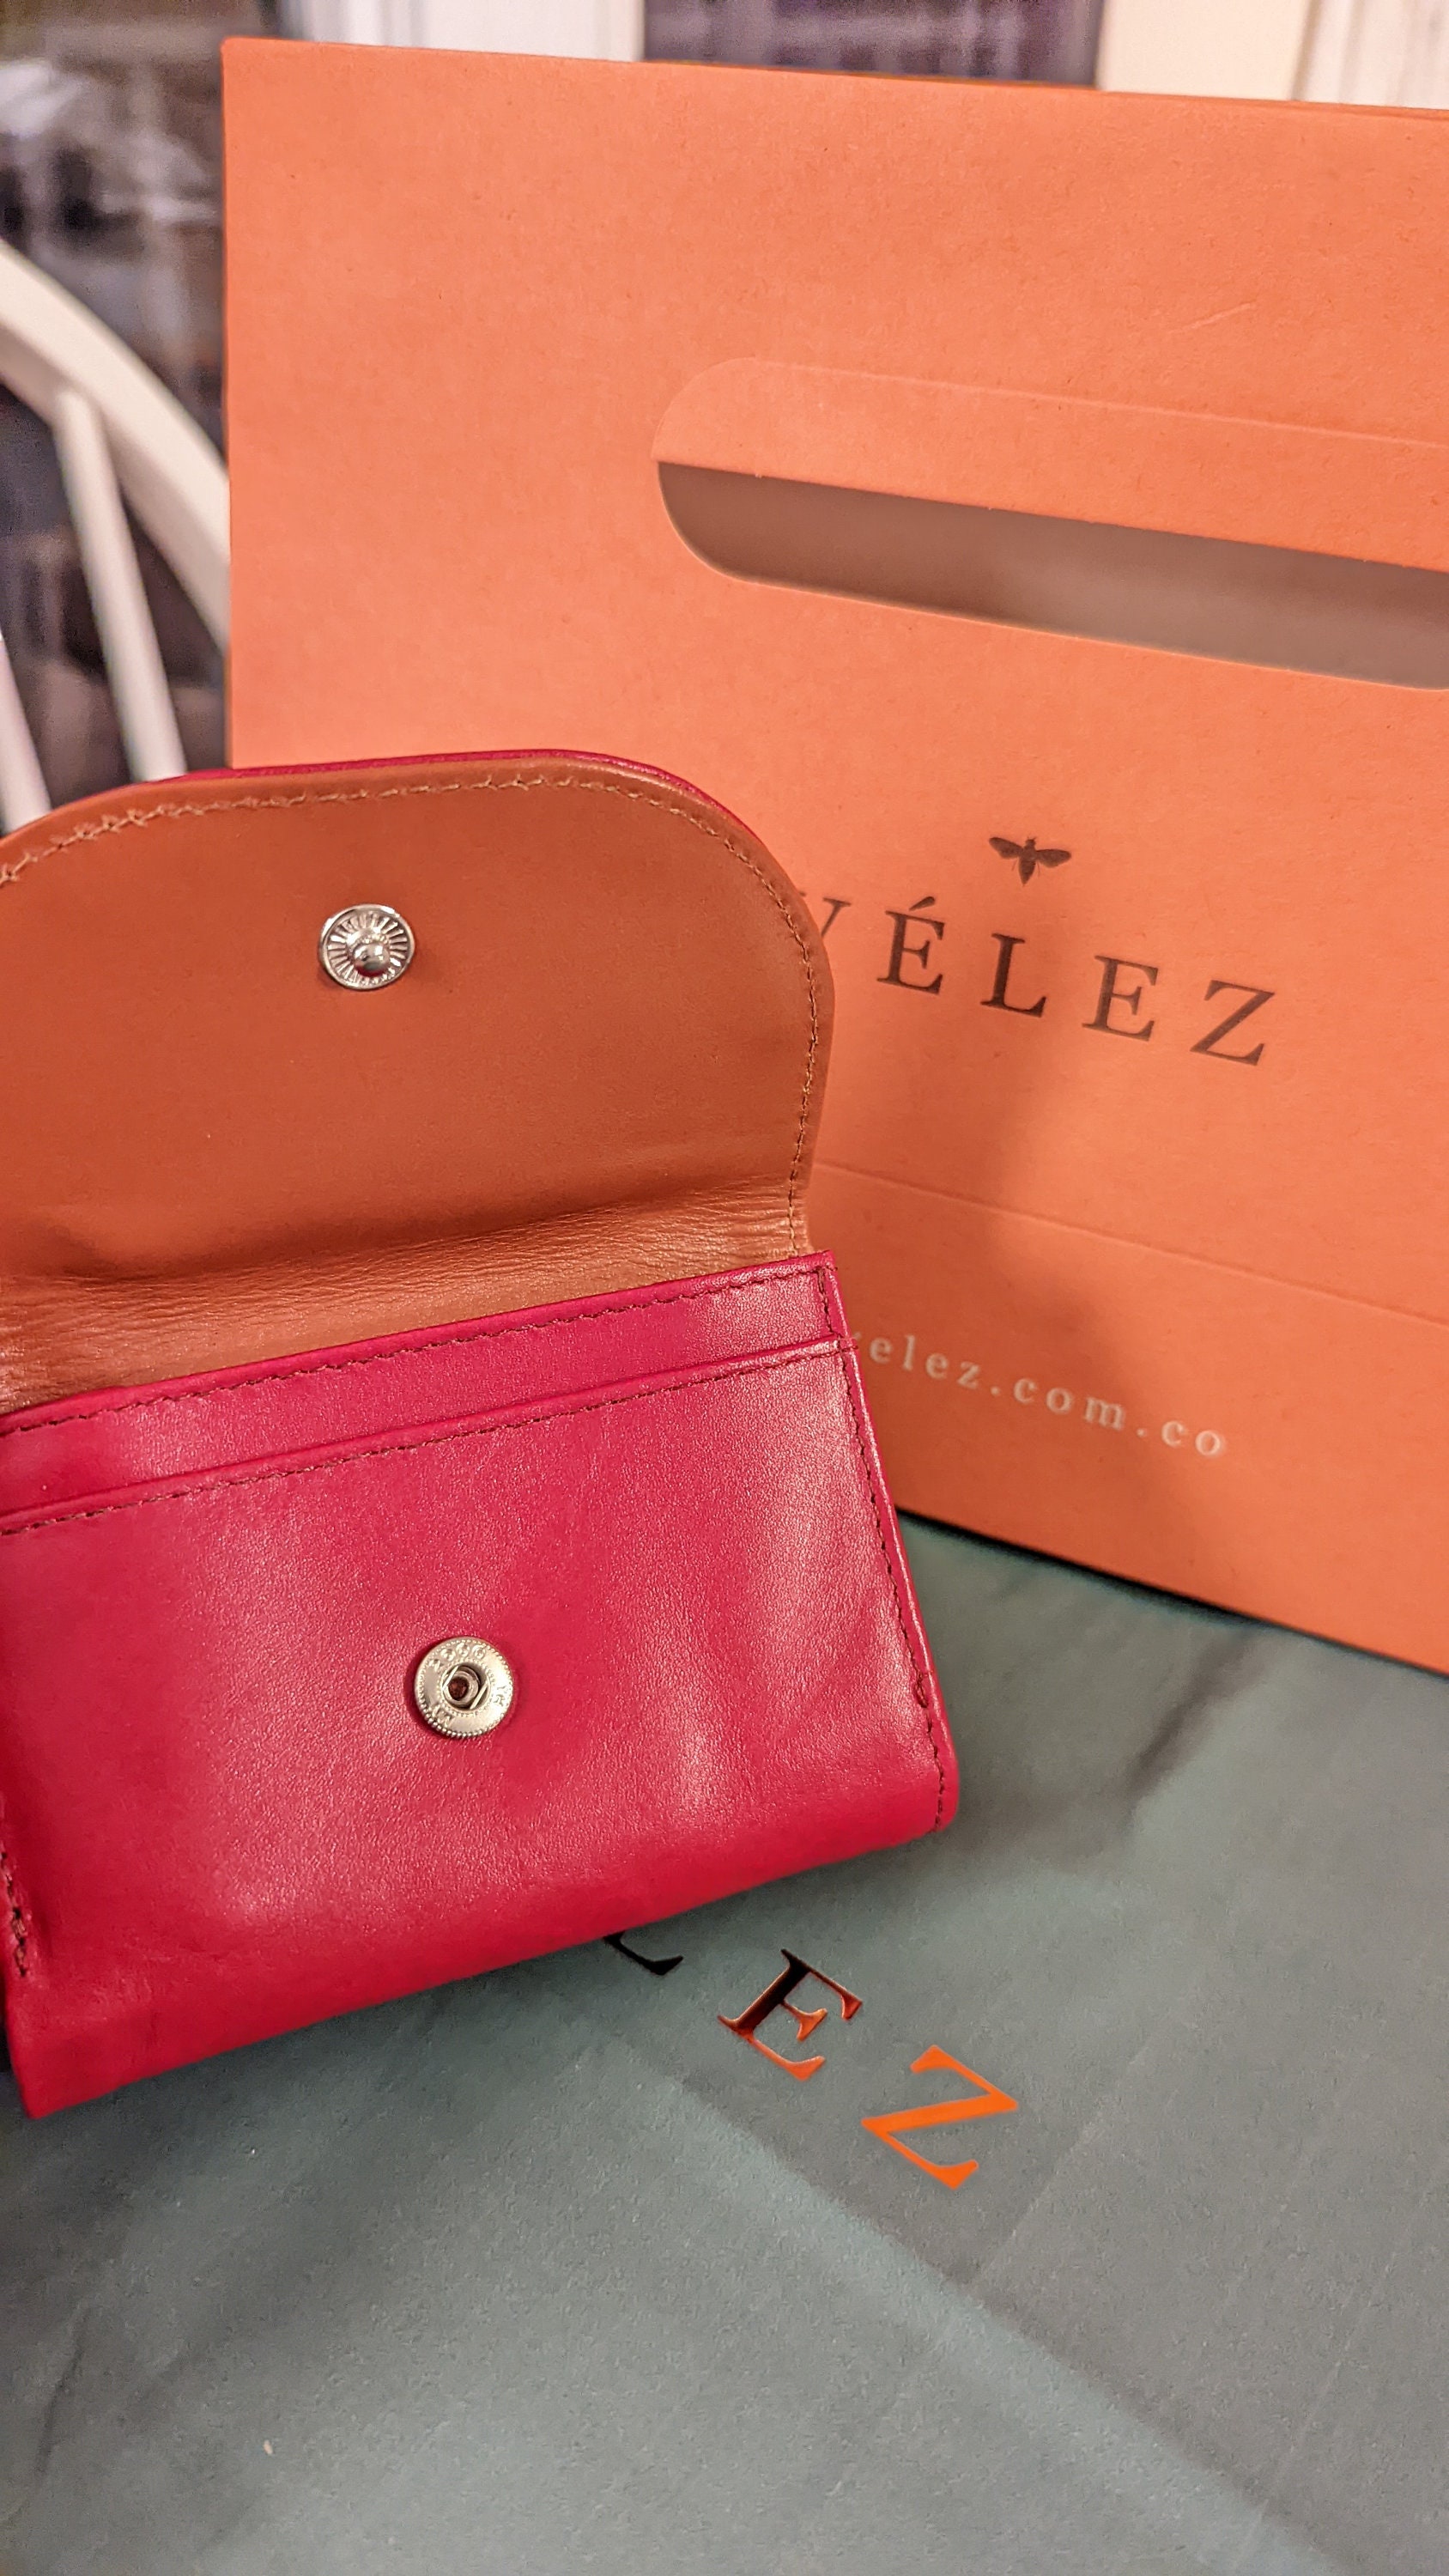 VELEZ Small Wallet for Women - Tan Full Grain Leather Wallet - Trifold RFID  Blocking Wallet - Slim Wallet with Coin Purse